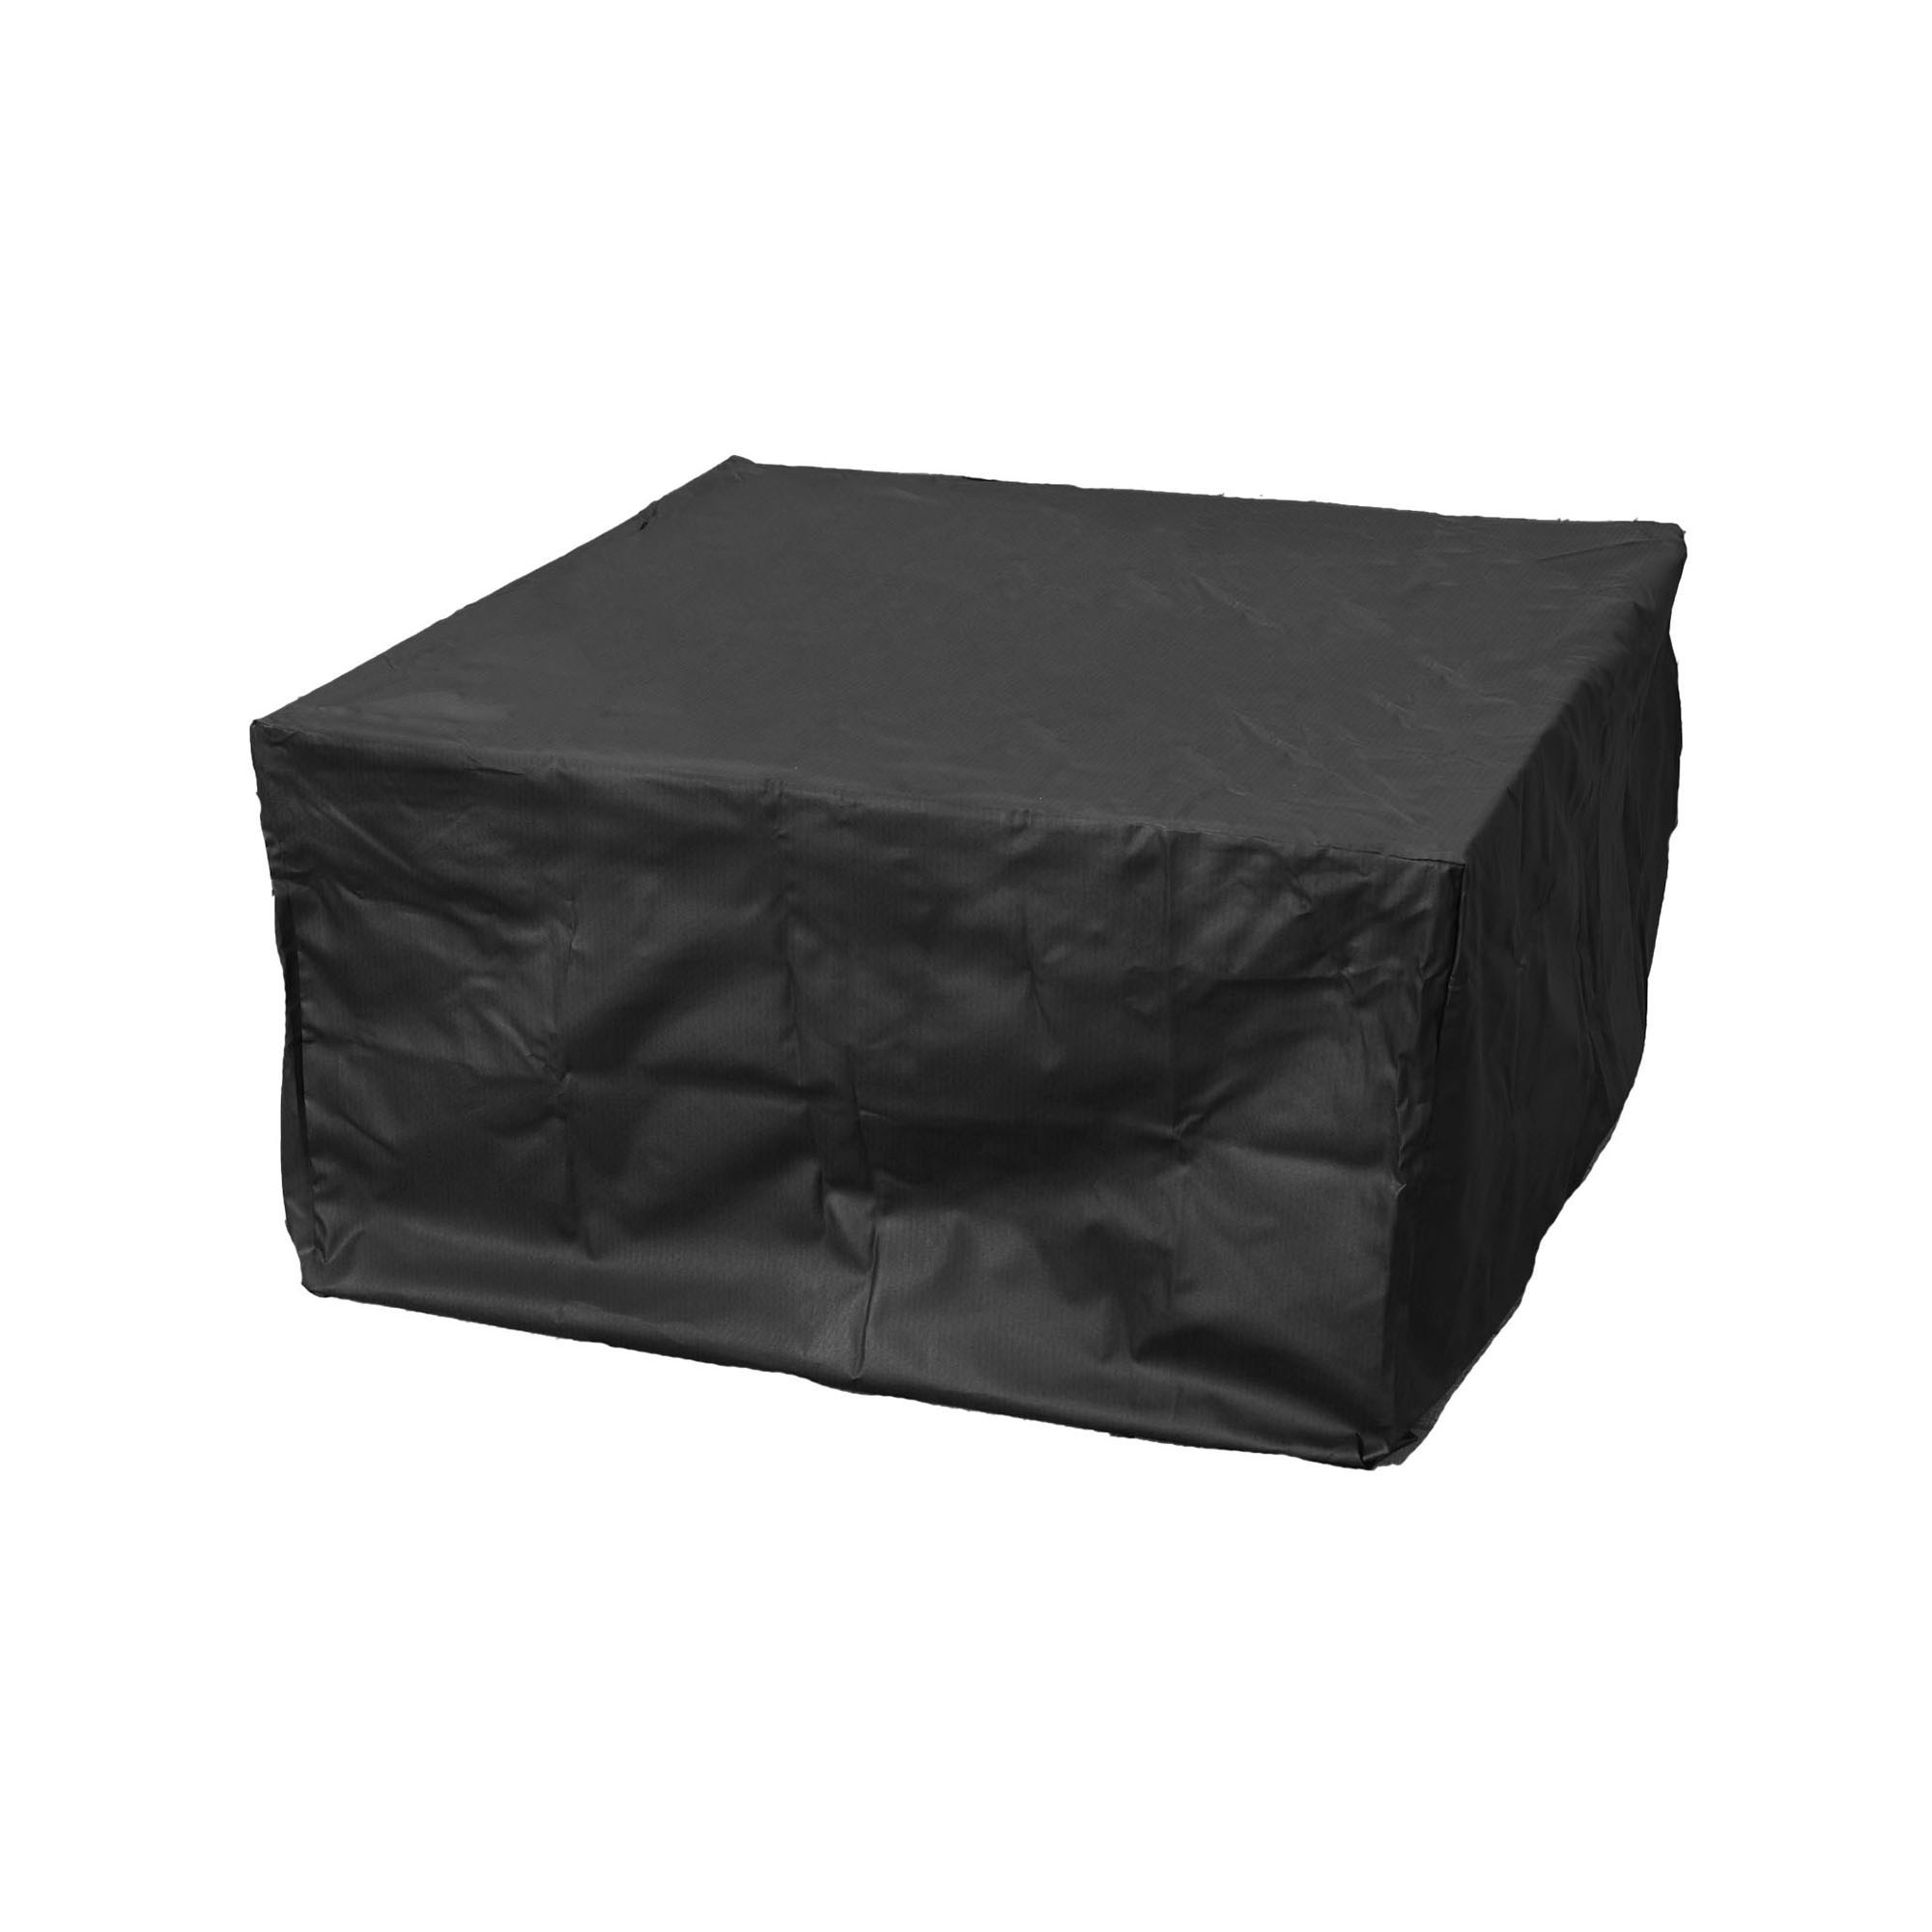 Outdoor Square Durable Fire Pit Cover, 30 Inch Square Fire Pit